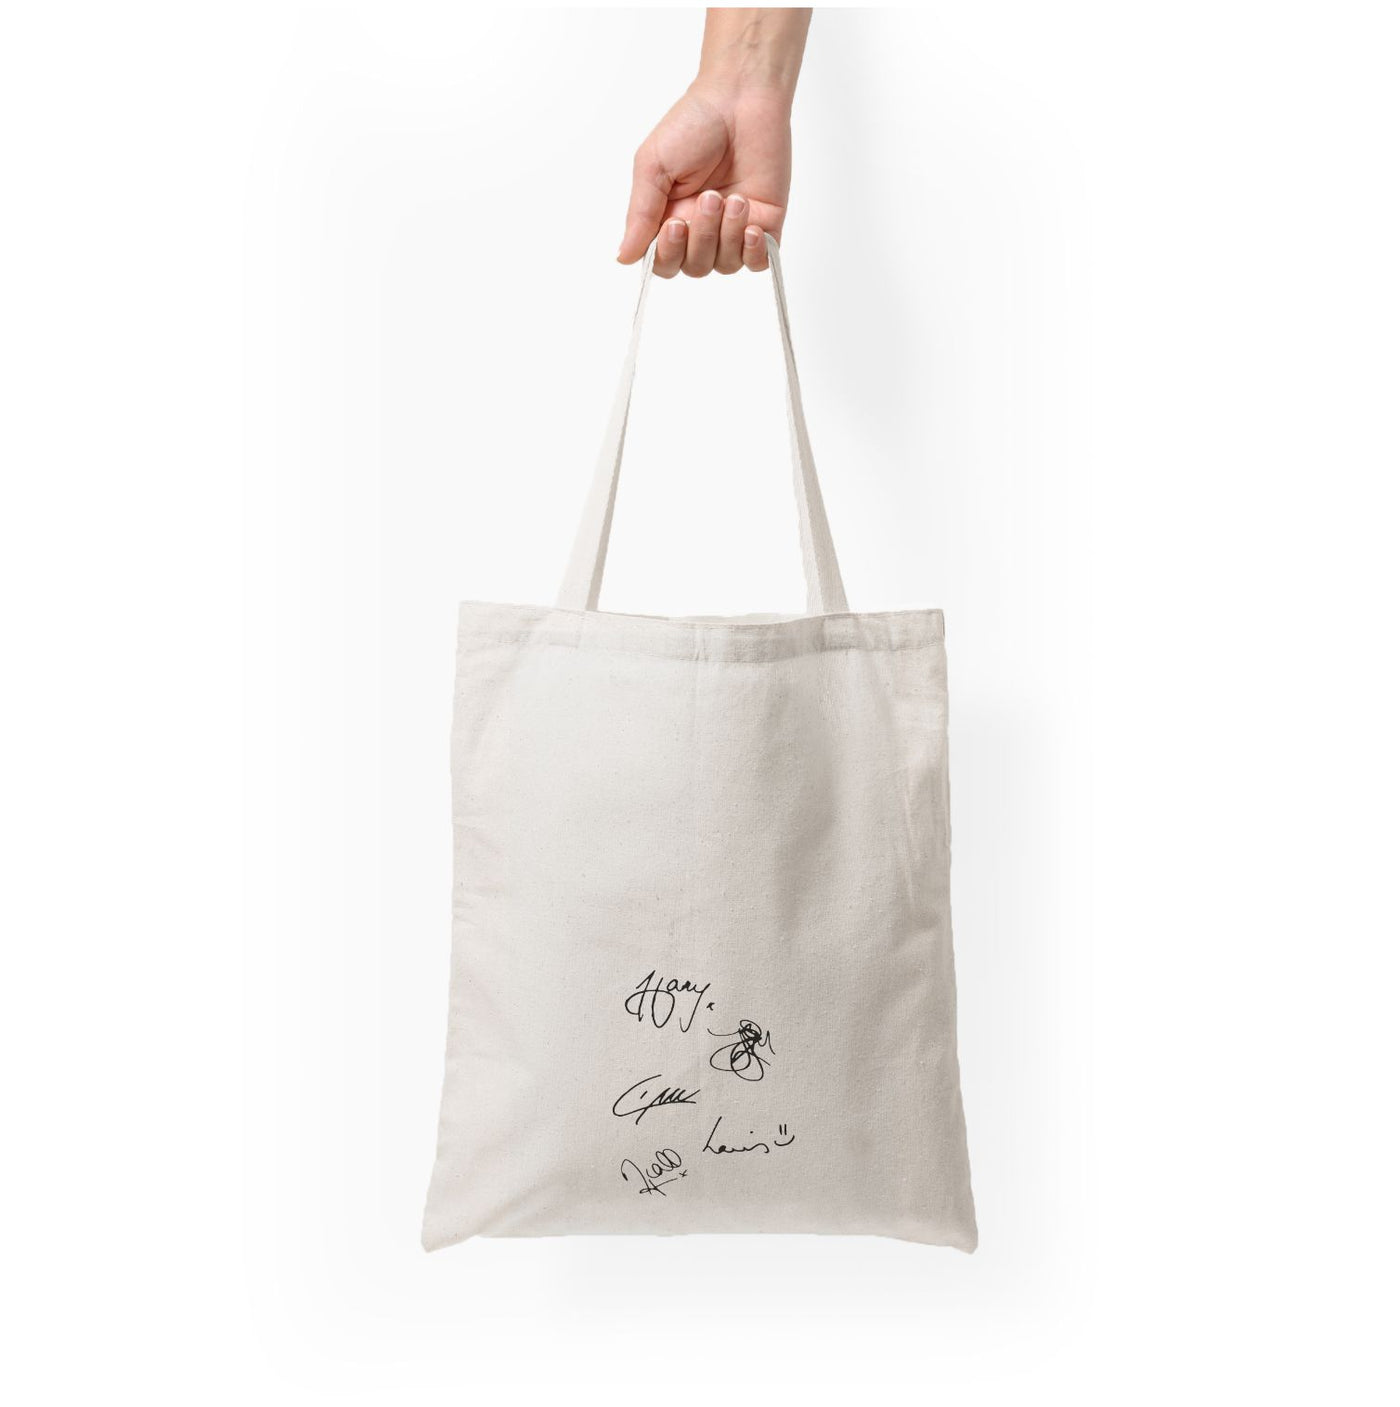 Signatures - One Direction Tote Bag